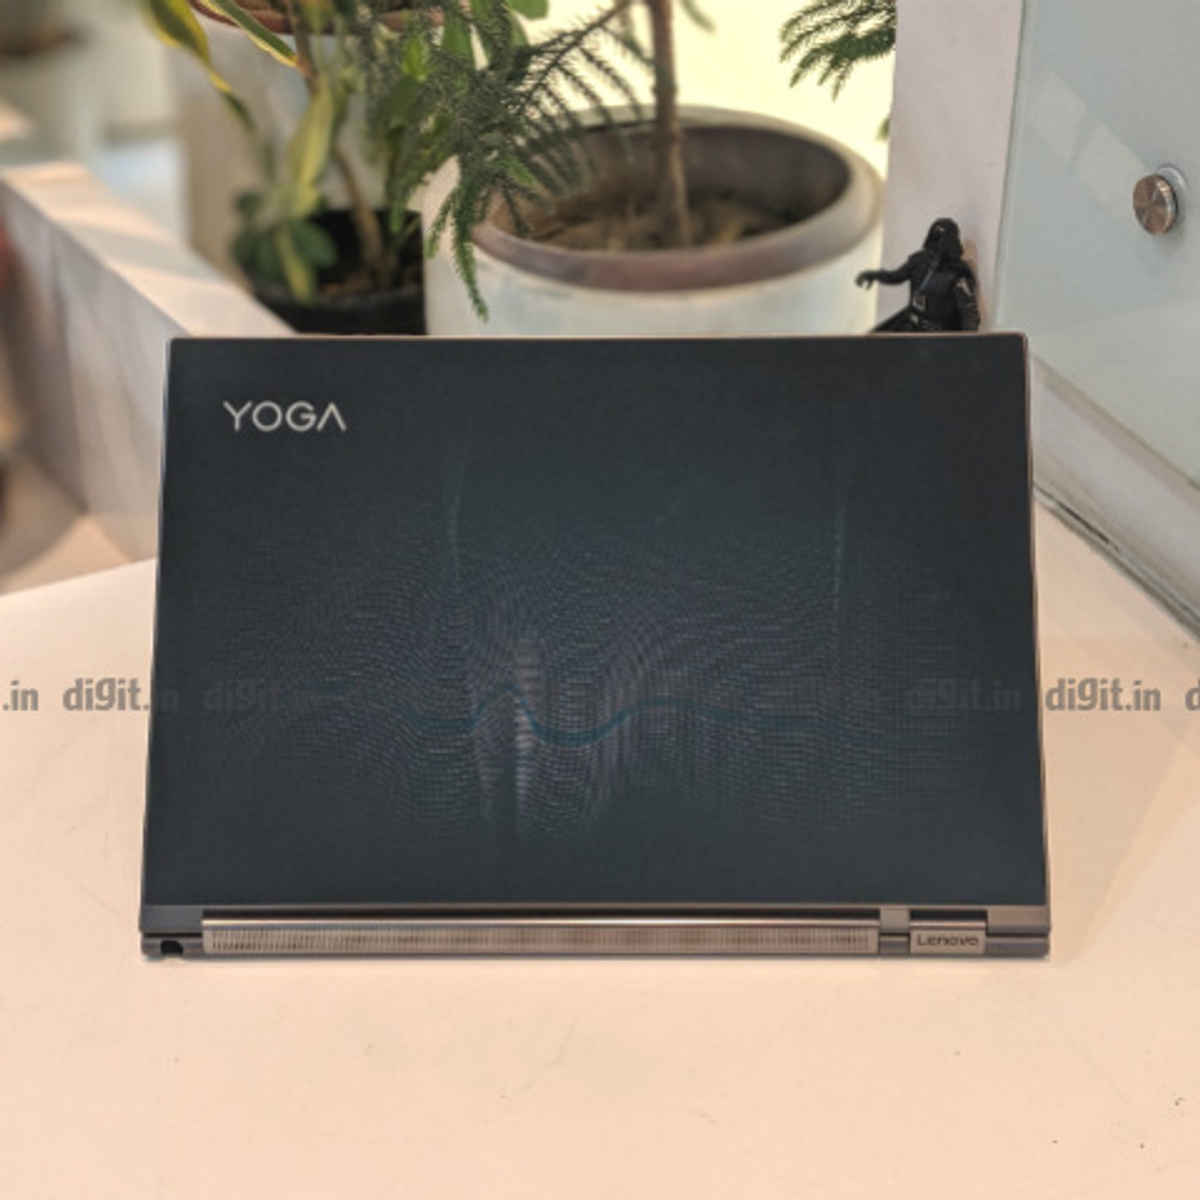 Lenovo Yoga C930 Review: High on style, performance, and price